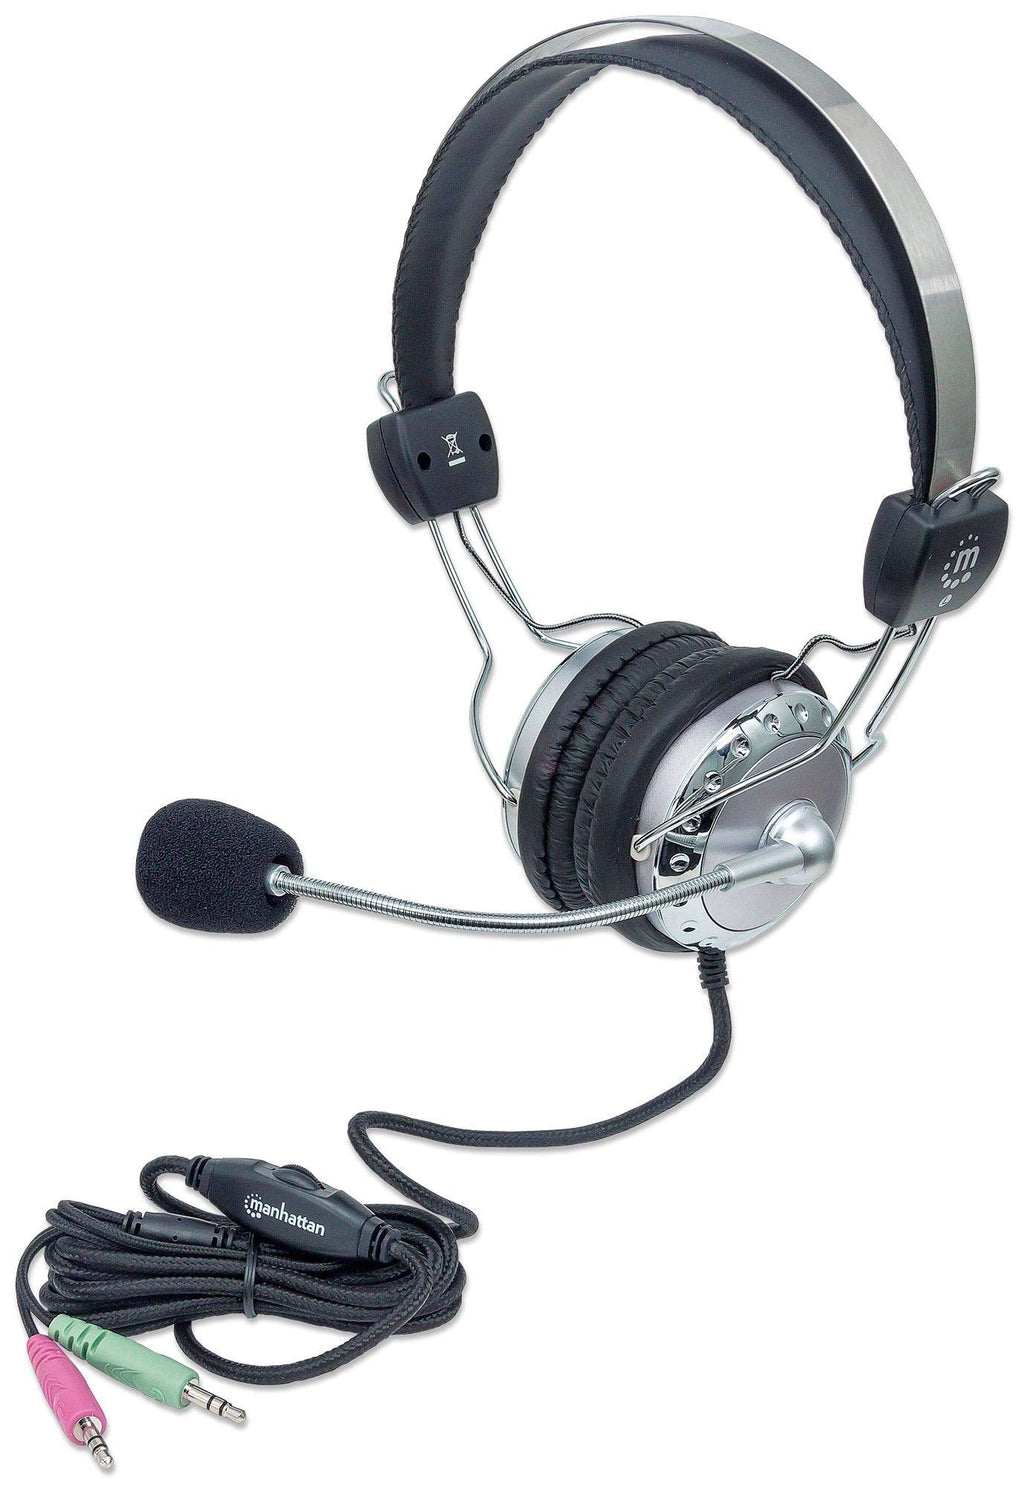  [AUSTRALIA] - Manhattan Stereo Headset with Flexible Microphone, 8 ft. Connecting Cable with Two 3.5 mm Plugs for Audio & Microphone, Volume Control - for Desktop, Laptop, Computers – 175517